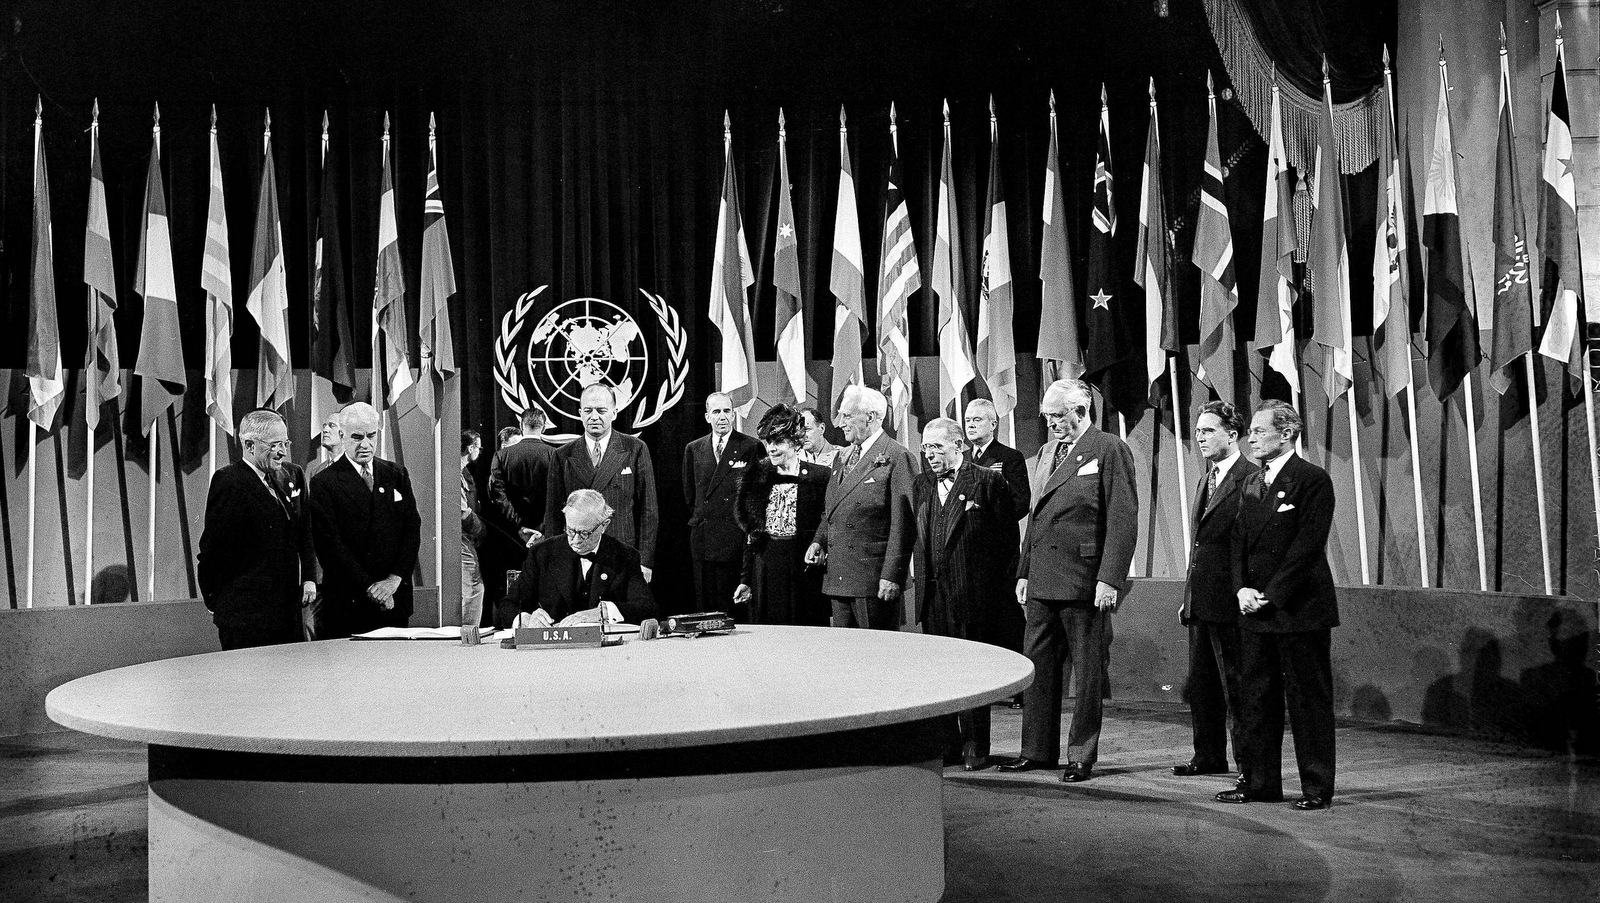 President Harry S. Truman and the entire American delegation look on as Sen. Tom Connally signs the United Nations Charter in San Francisco, June 26, 1945. Standing, from left: President Truman; Secretary of State Edward Stettinius Jr.; Harold Edward Stassen; unidentified; Dean Virginia Gildersleeve; Rep. Charles A. Eaton; Rep. Sol Bloom, and Sen. Arthur Vandenberg. (AP Photo)